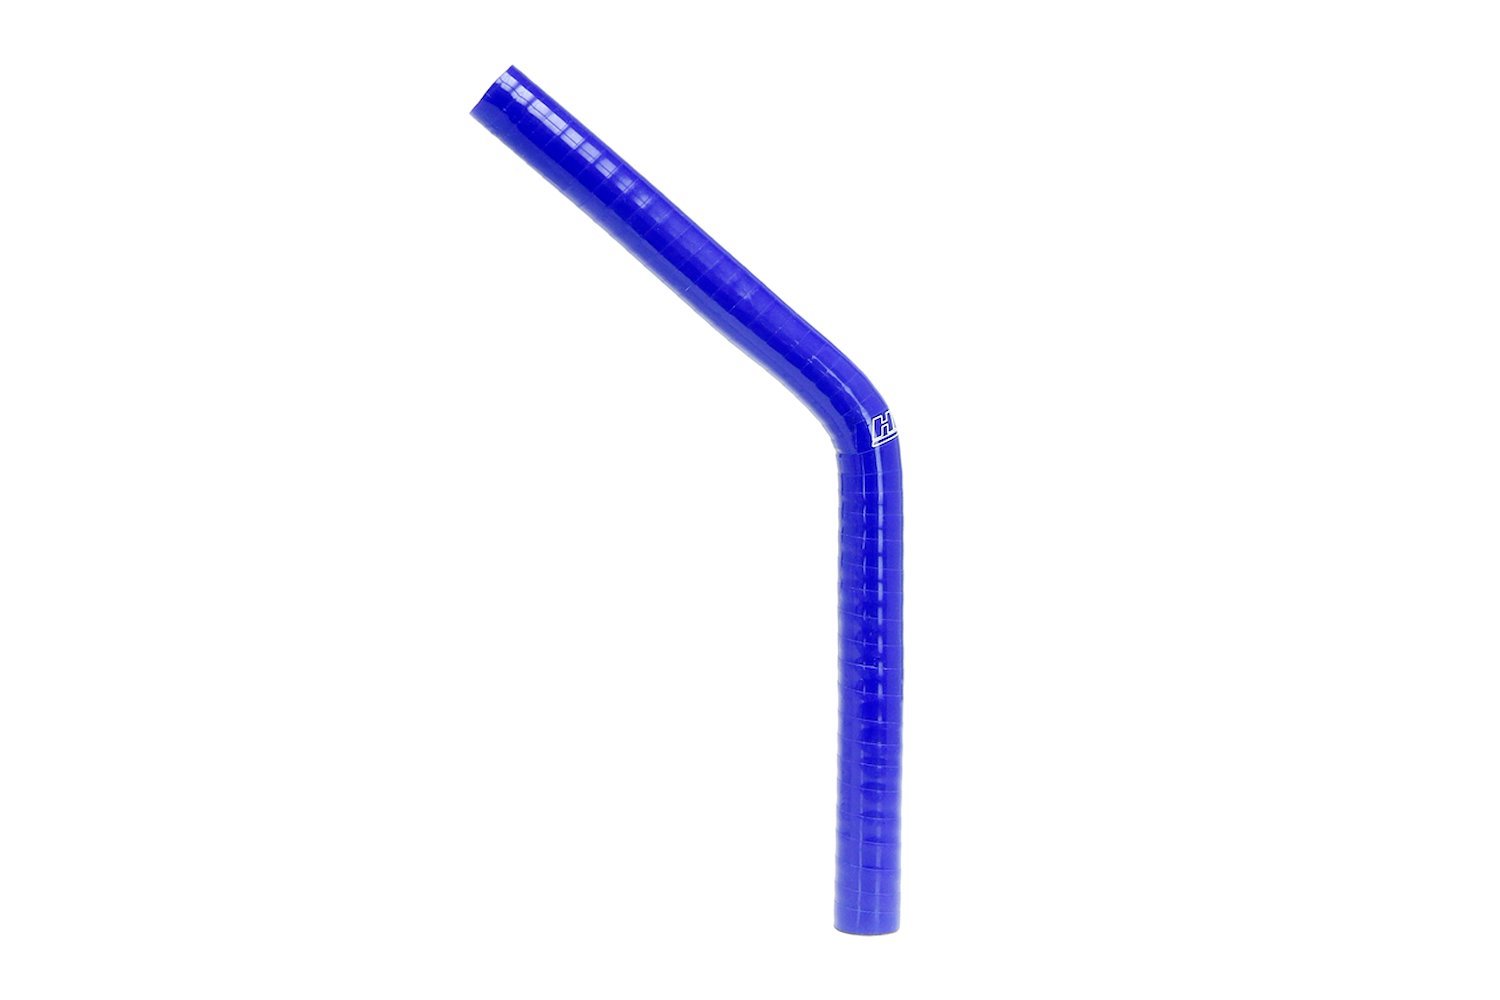 HTSEC45-075-L10-BLUE Silicone 45-Degree Elbow Hose, High-Temp 4-Ply Reinforced, 3/4 in. ID, 10 in. Leg, Blue